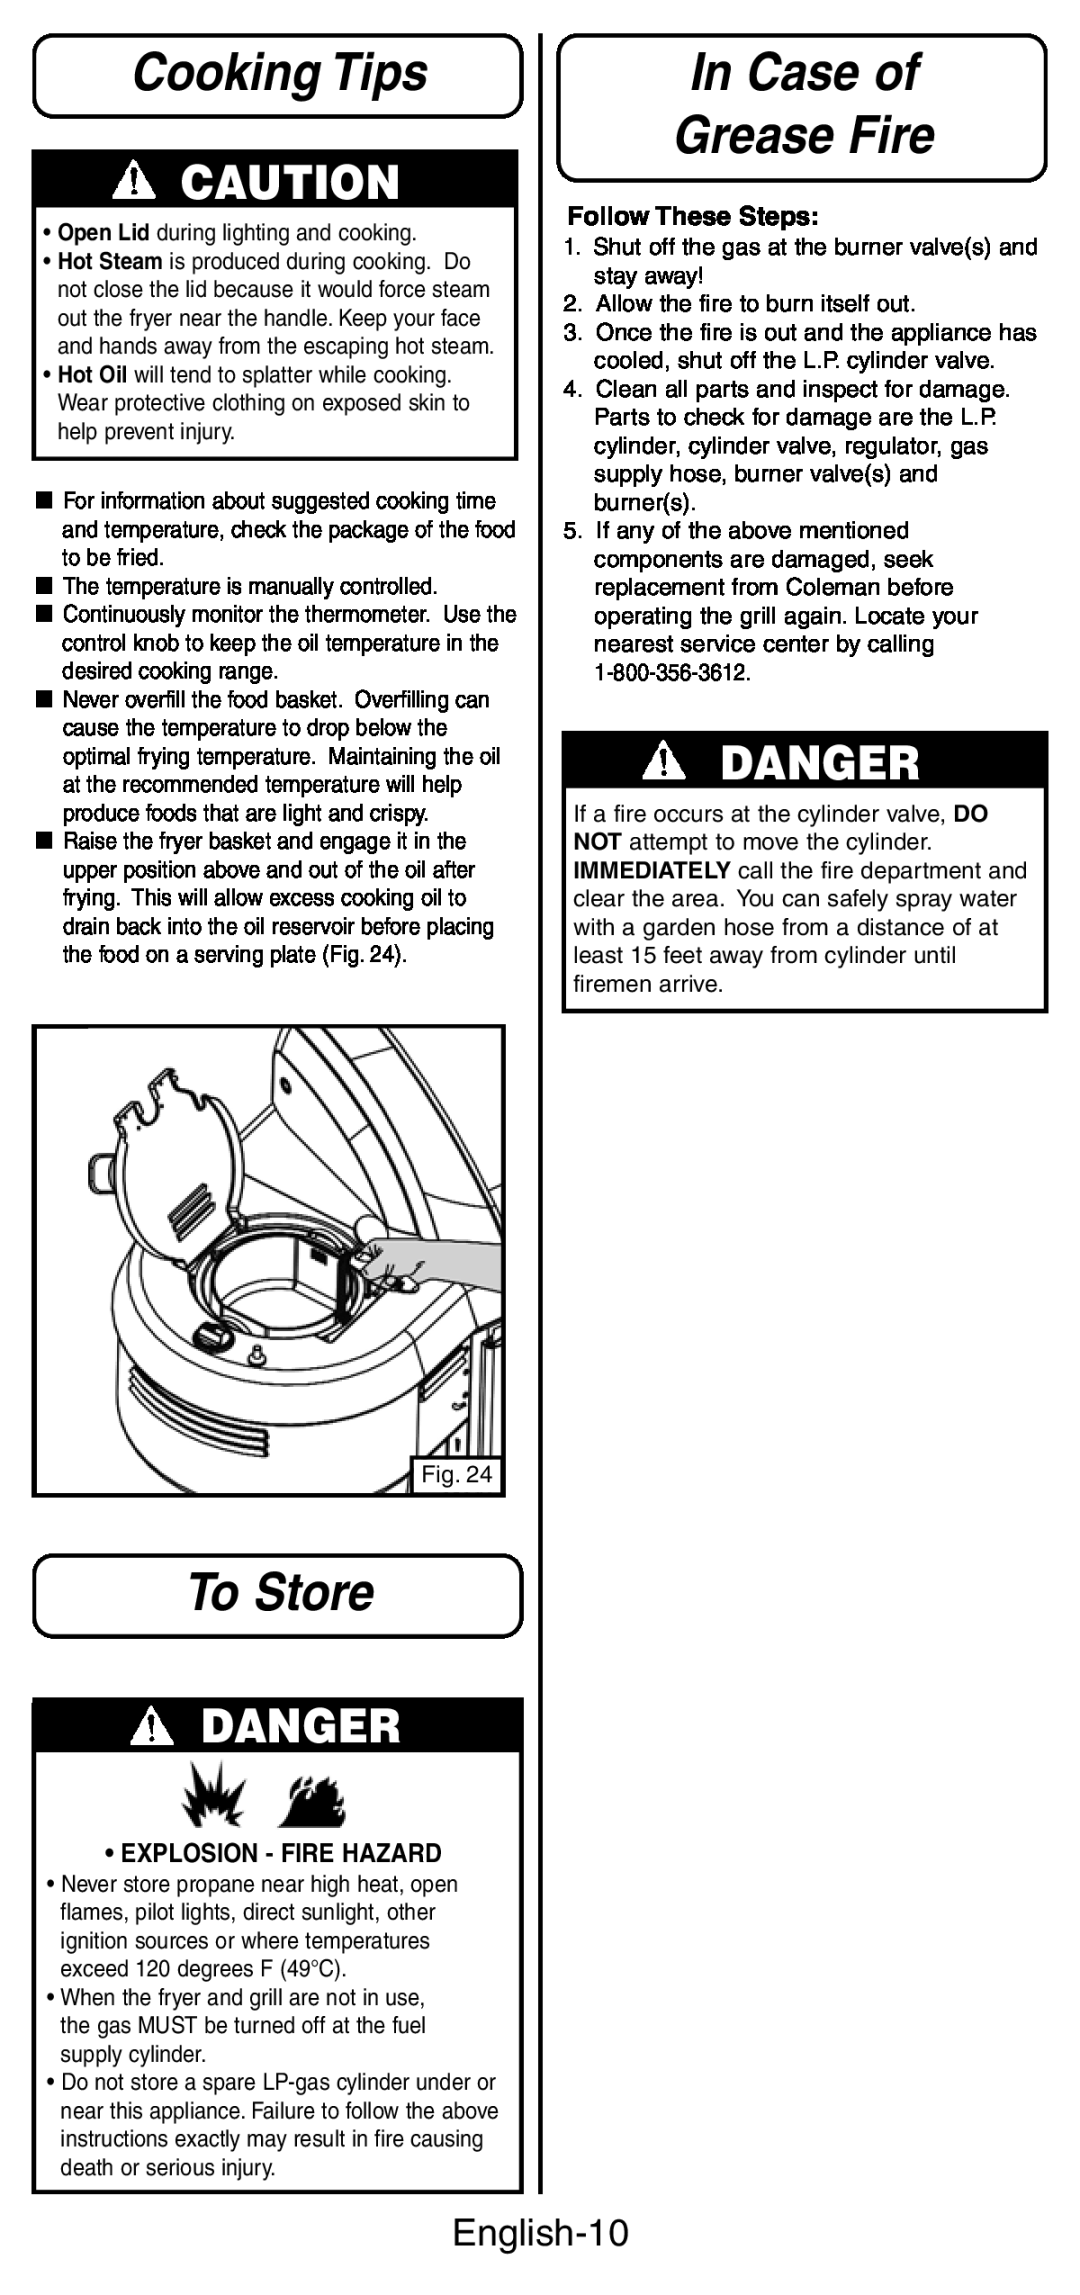 Coleman 9994 instruction manual Cooking Tips, To Store, In Case of Grease Fire, Danger, English-10, Explosion - Fire Hazard 